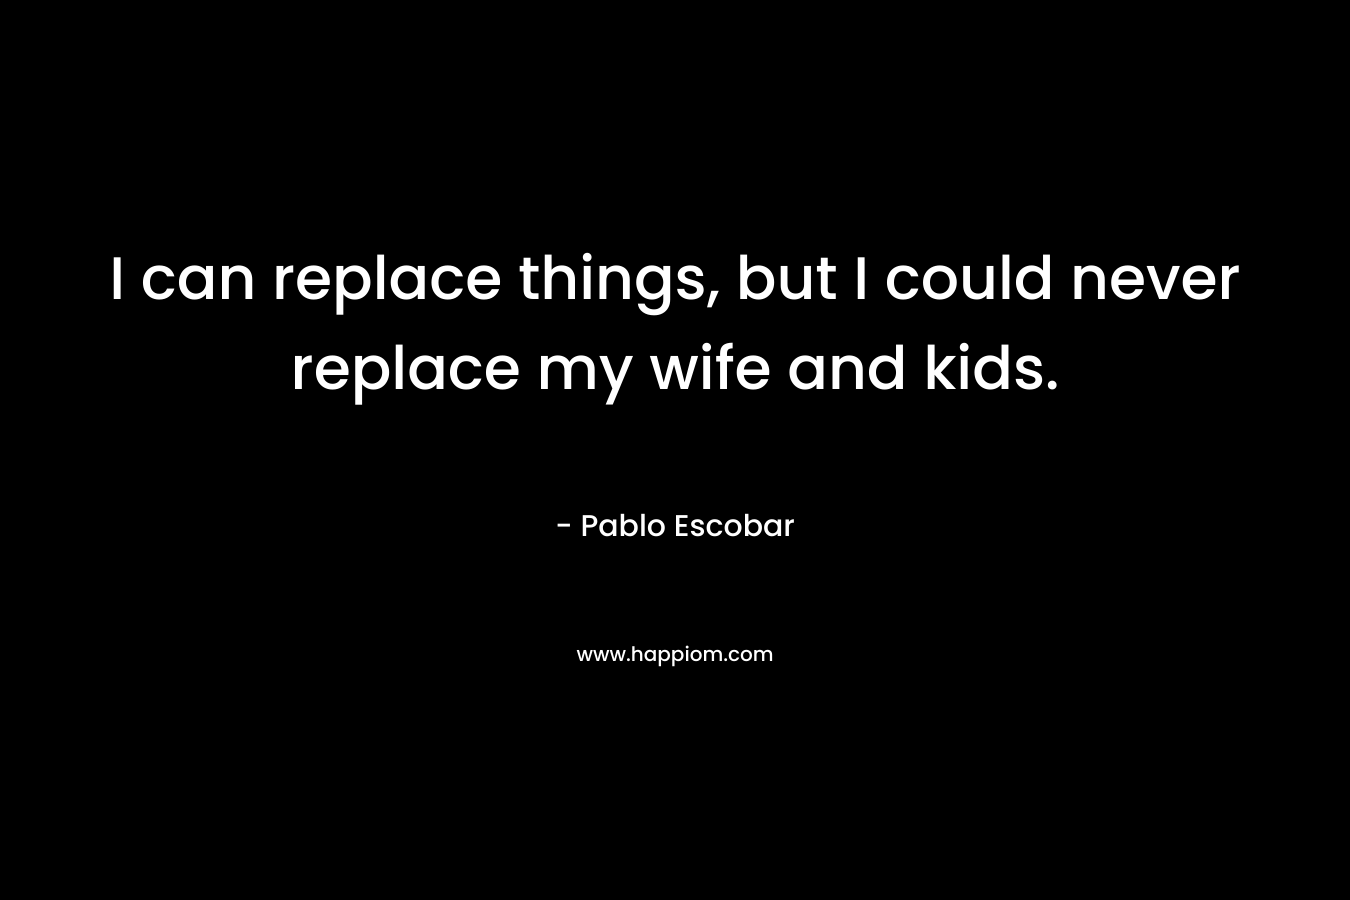 I can replace things, but I could never replace my wife and kids. – Pablo Escobar